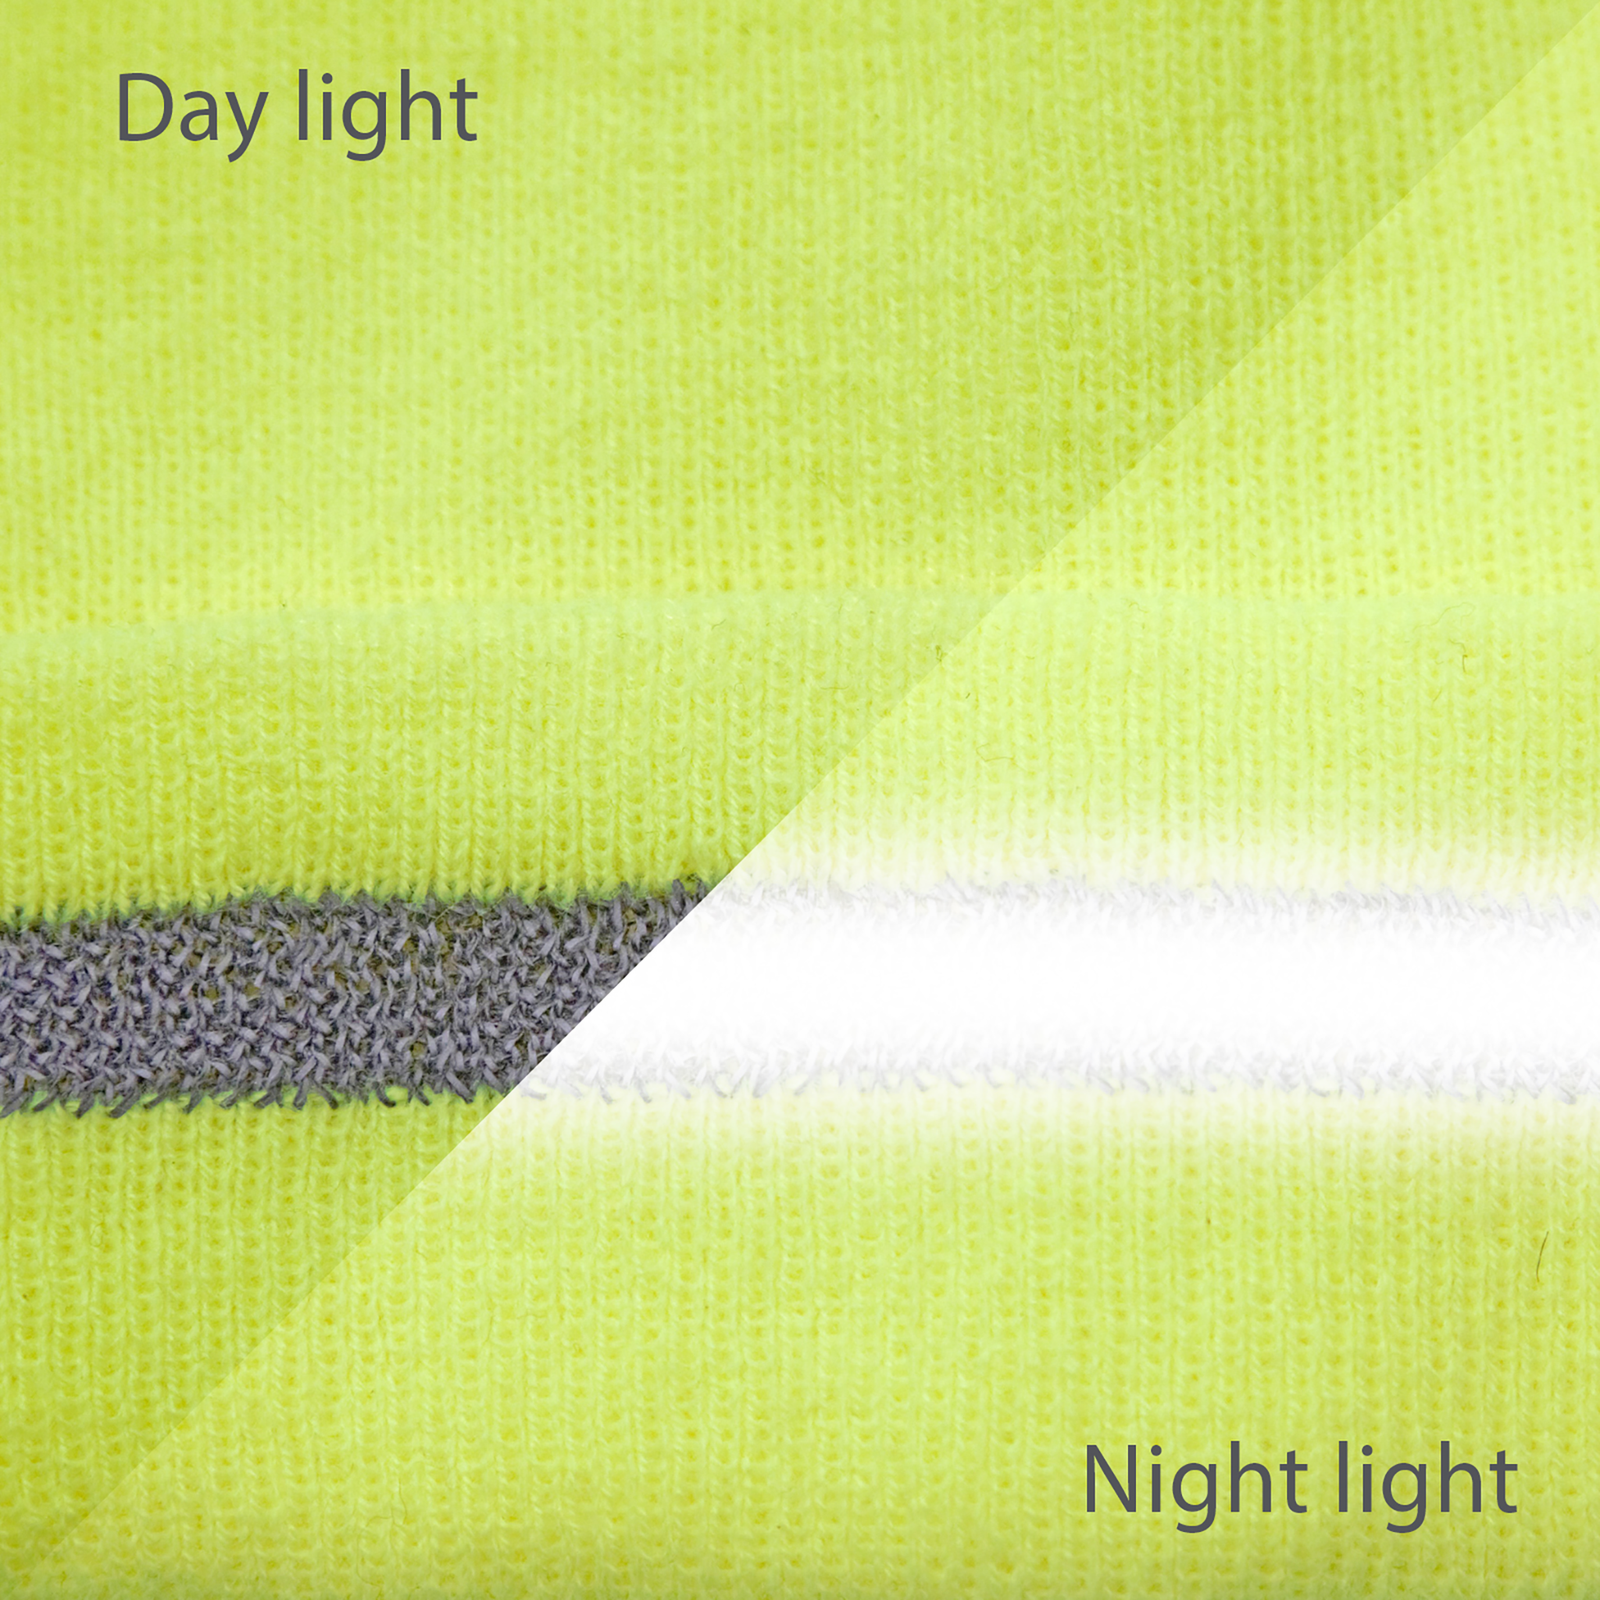 Close-up of the reflective stripe of the knitted vi visibility beanie during day time and night time. Reflective stripe becomes much brighter during night time.